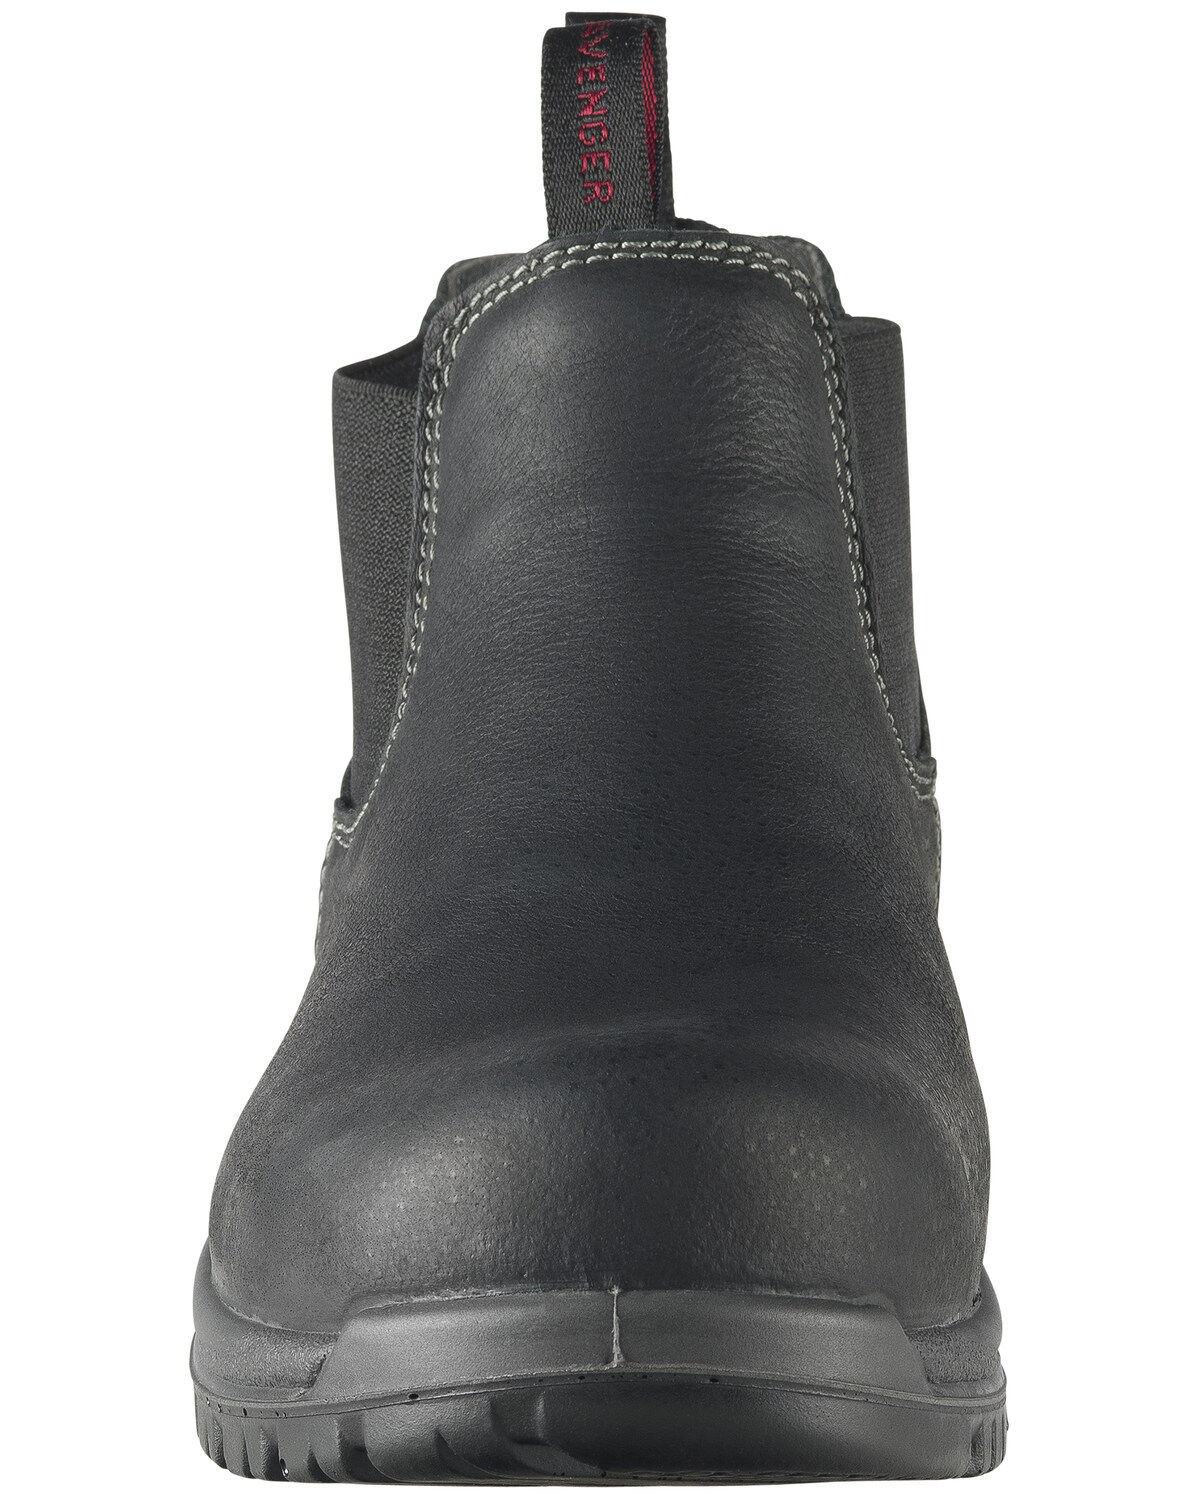 safety toe black boots